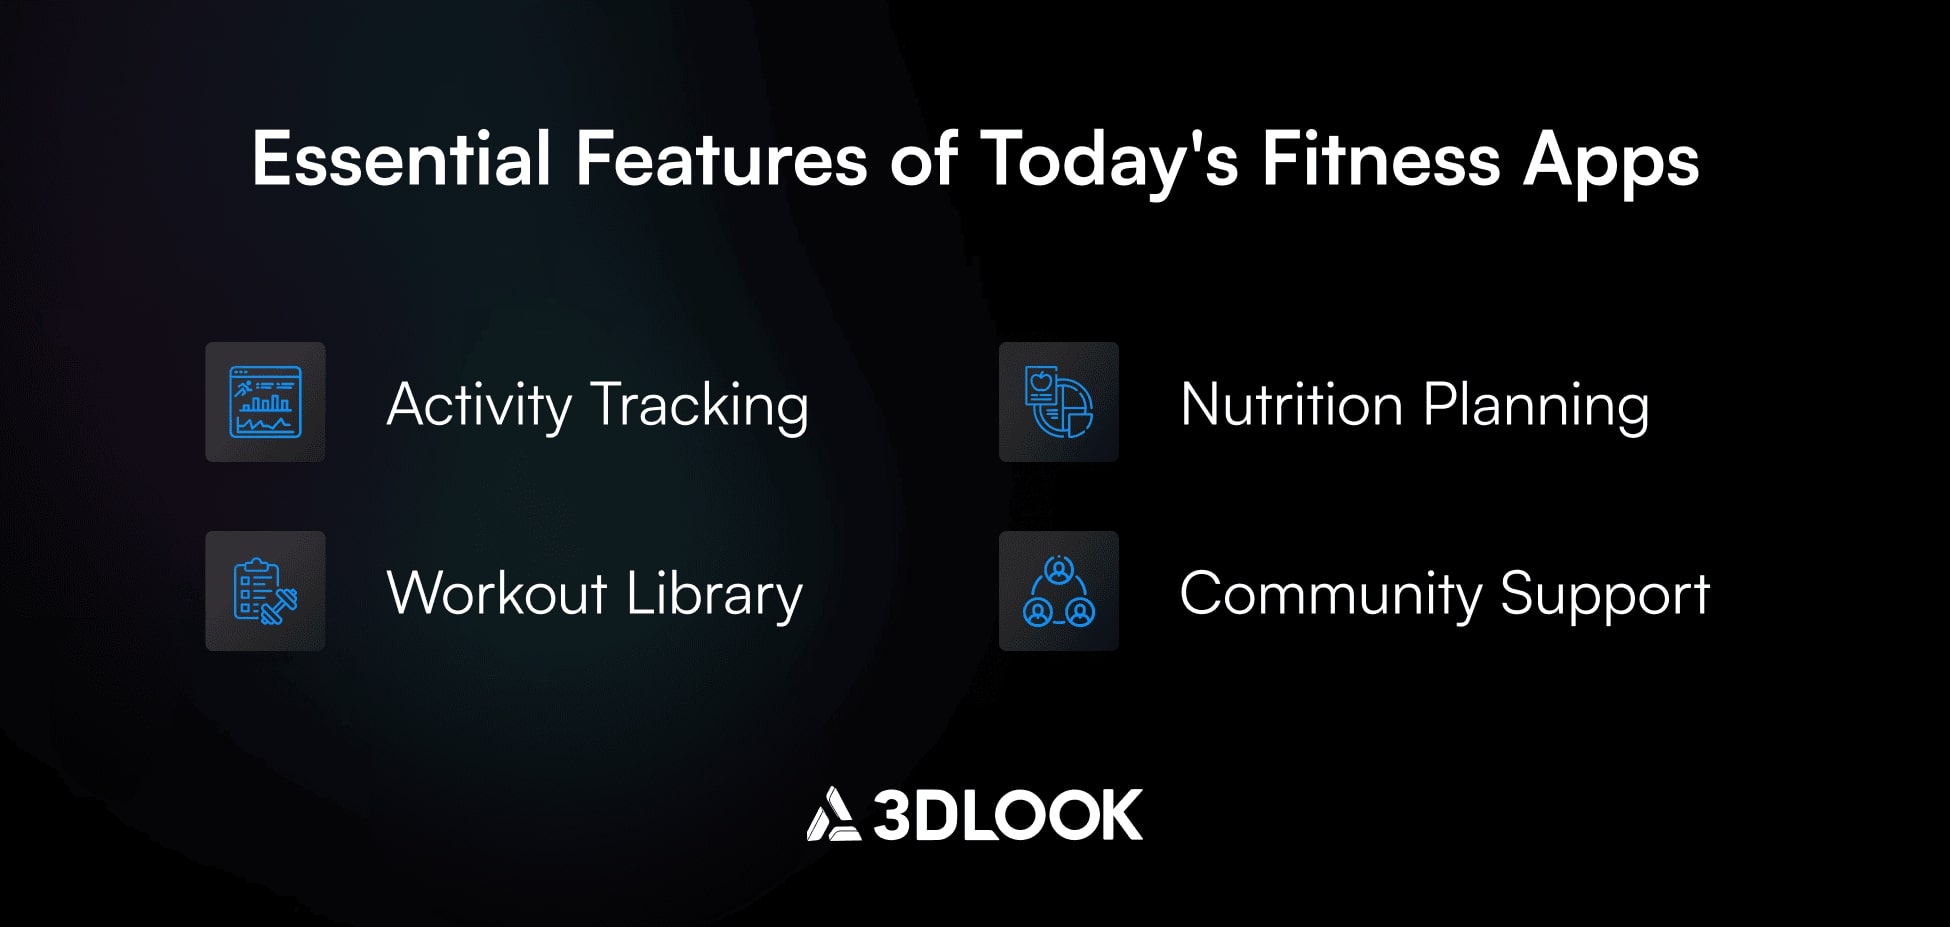 Essential Features of Today's Fitness Apps